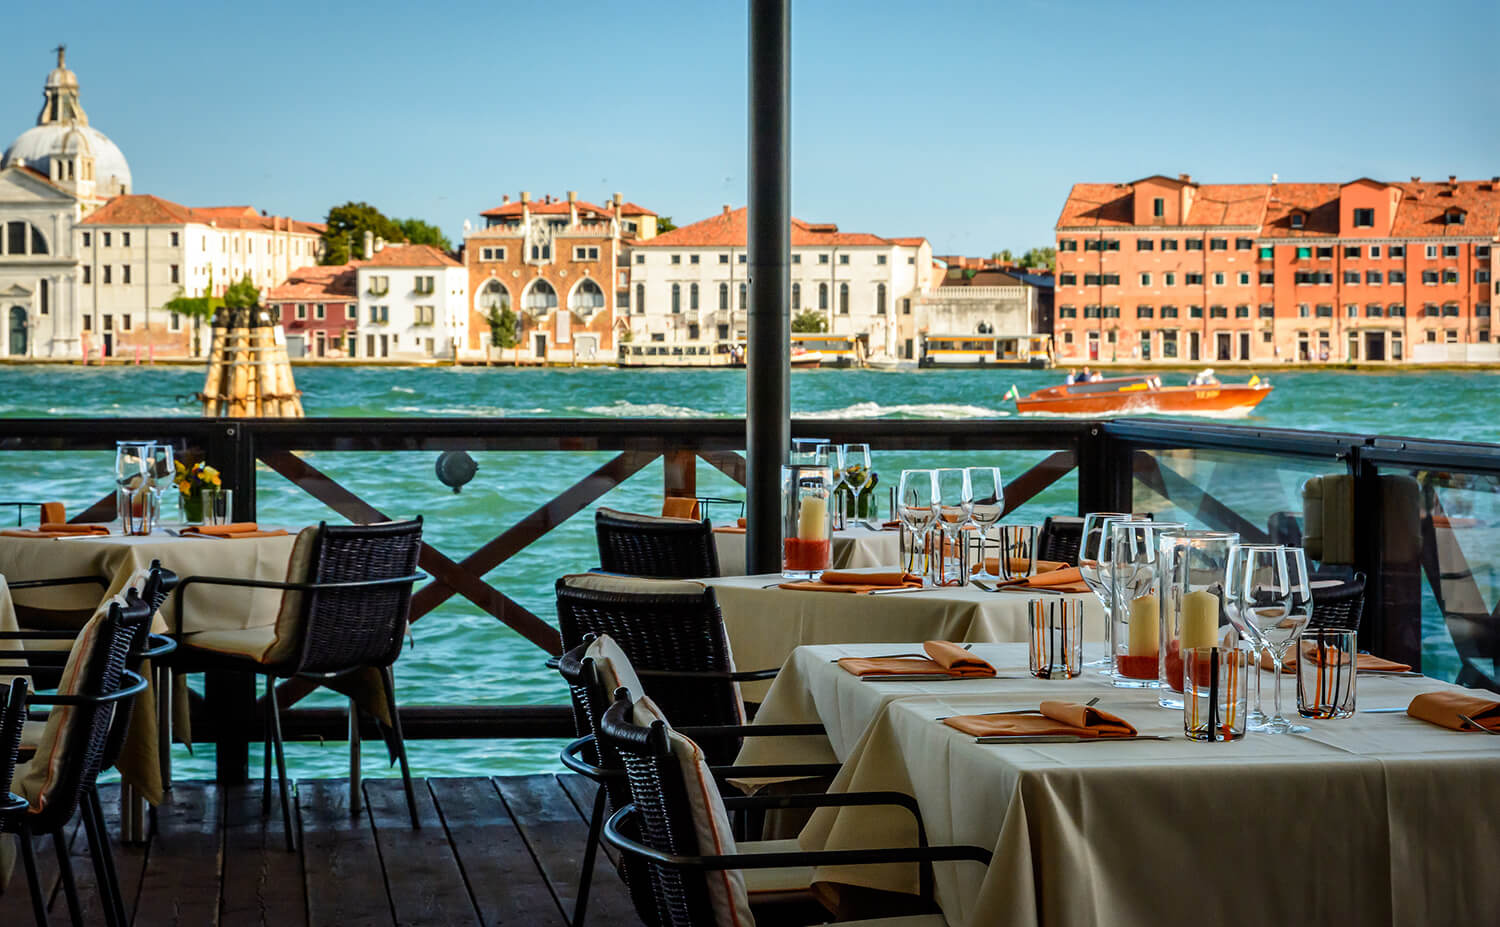 What Is The Best Restaurant In Venice Italy